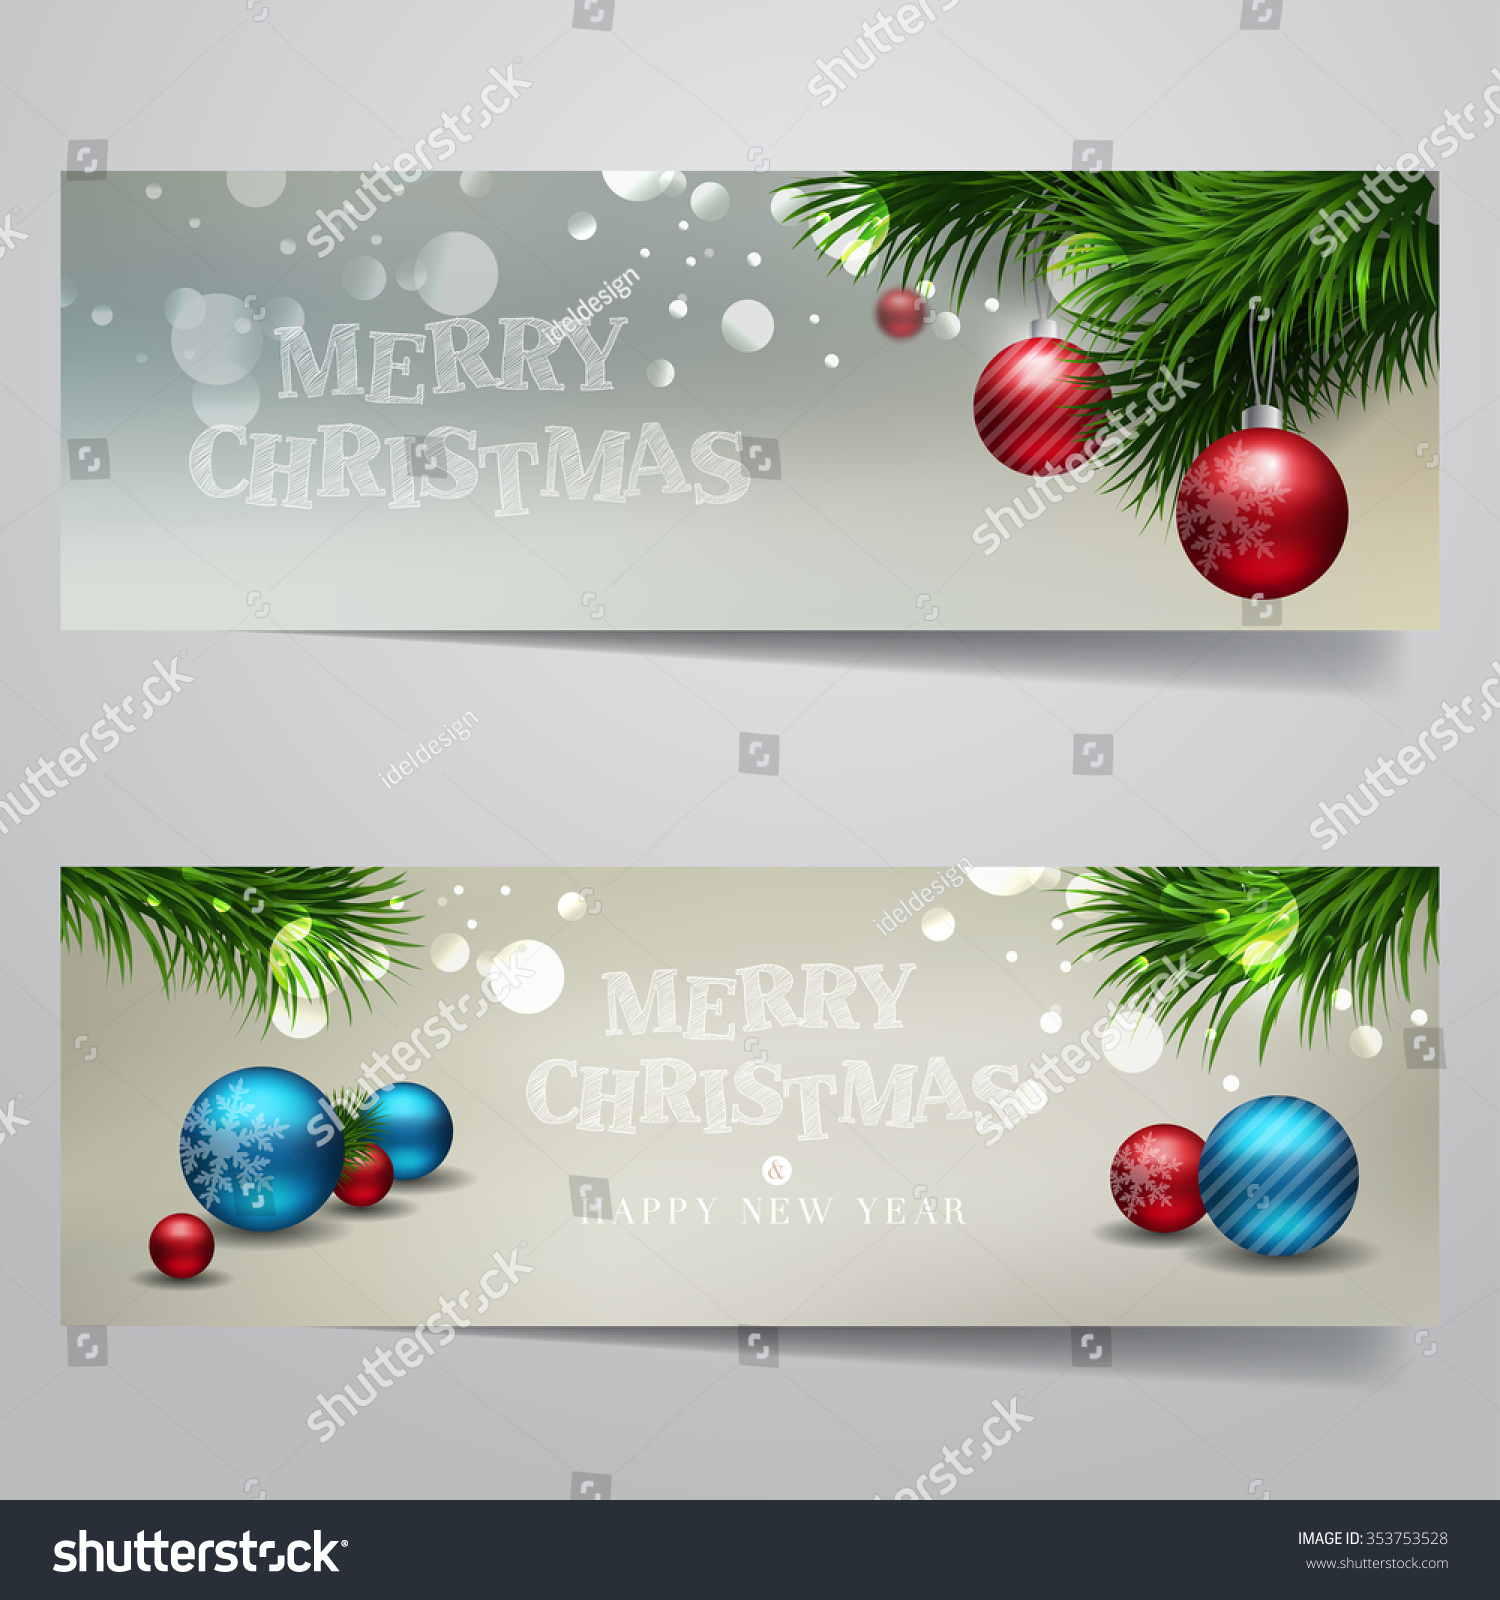 Vector Banner Christmas Background Ornaments Glossy Stock Vector ...